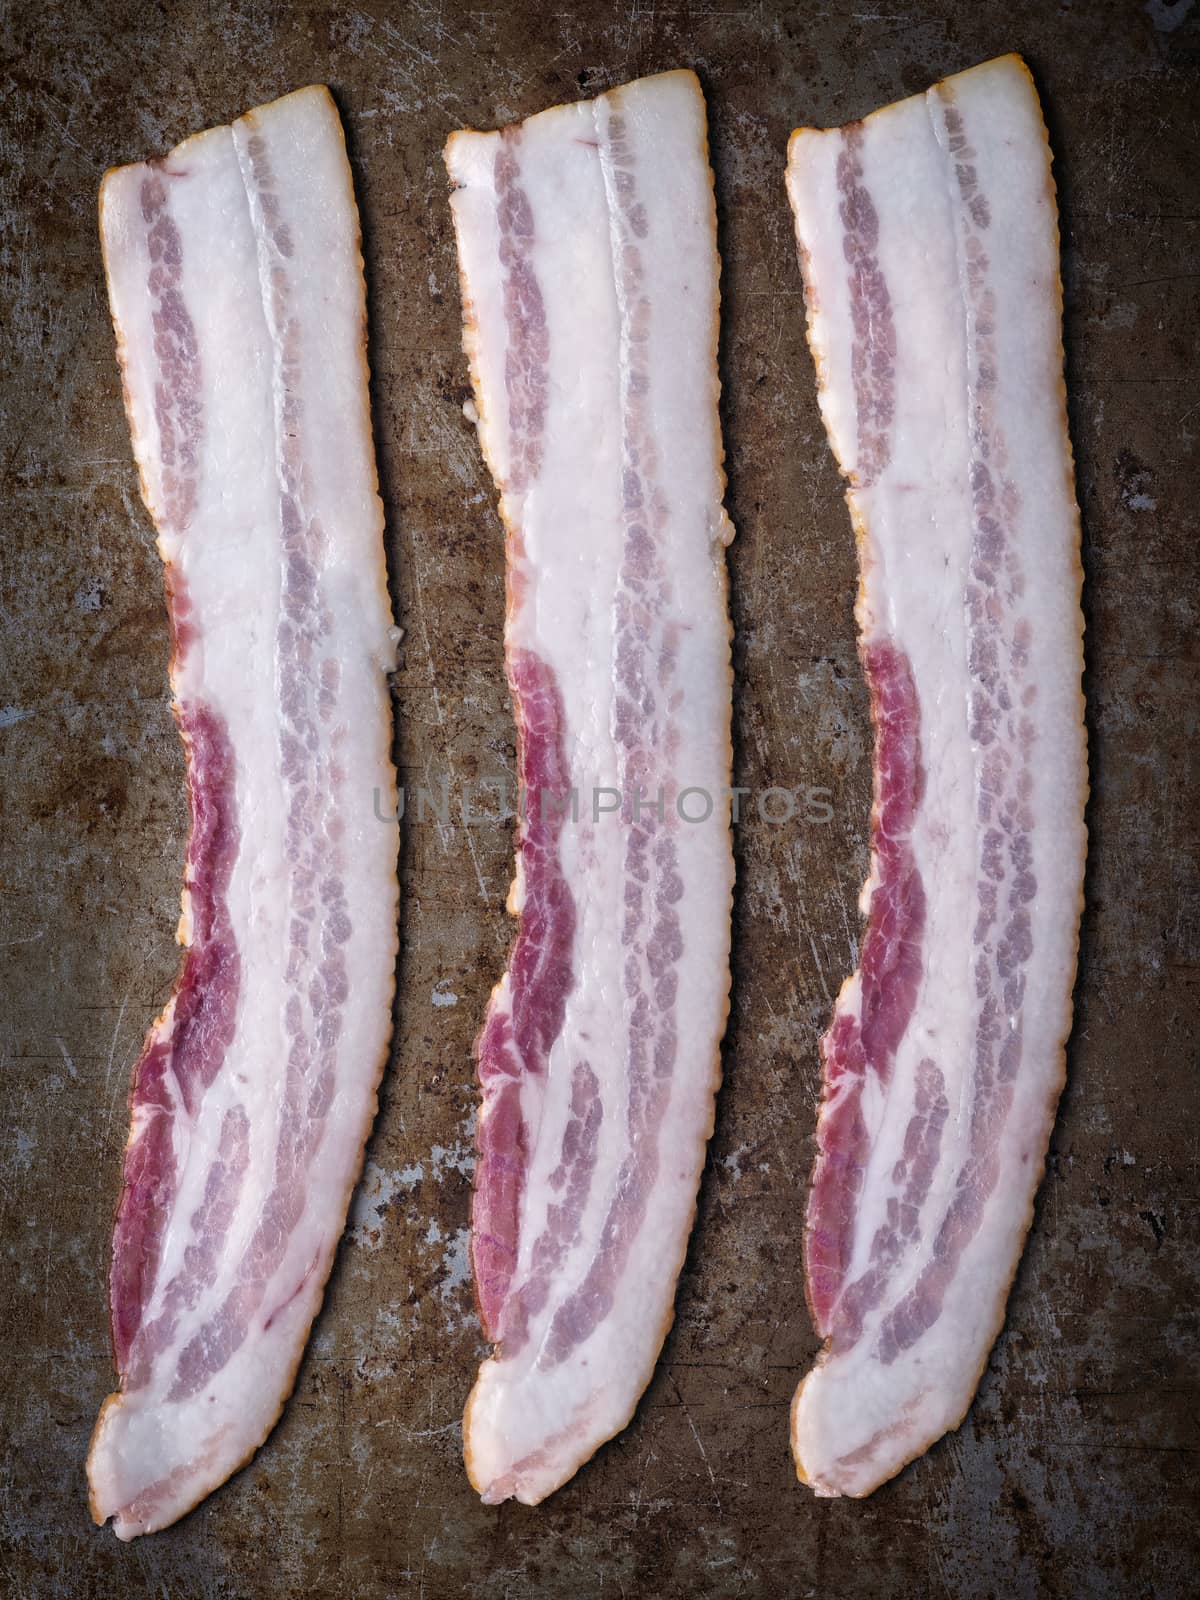 close up of rustic uncooked bacon